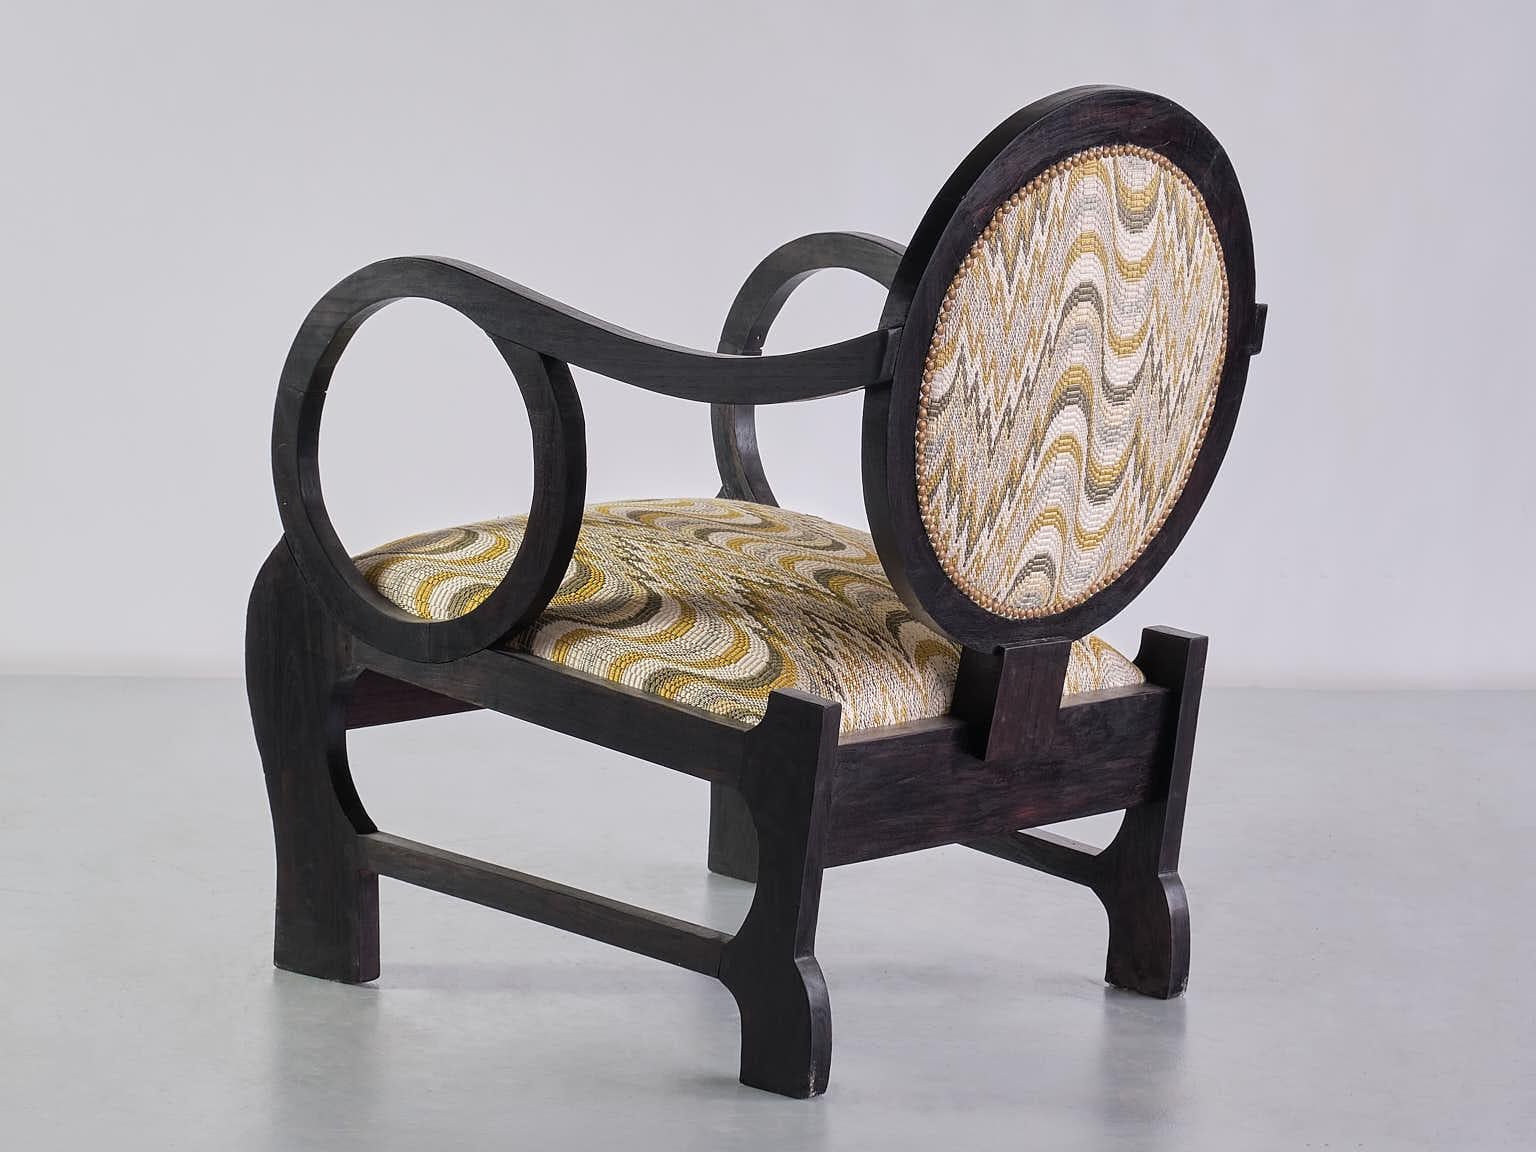 Pair of Lajos Kozma Attributed Armchairs in Oak and Dedar Jacquard, Late 1940s For Sale 5